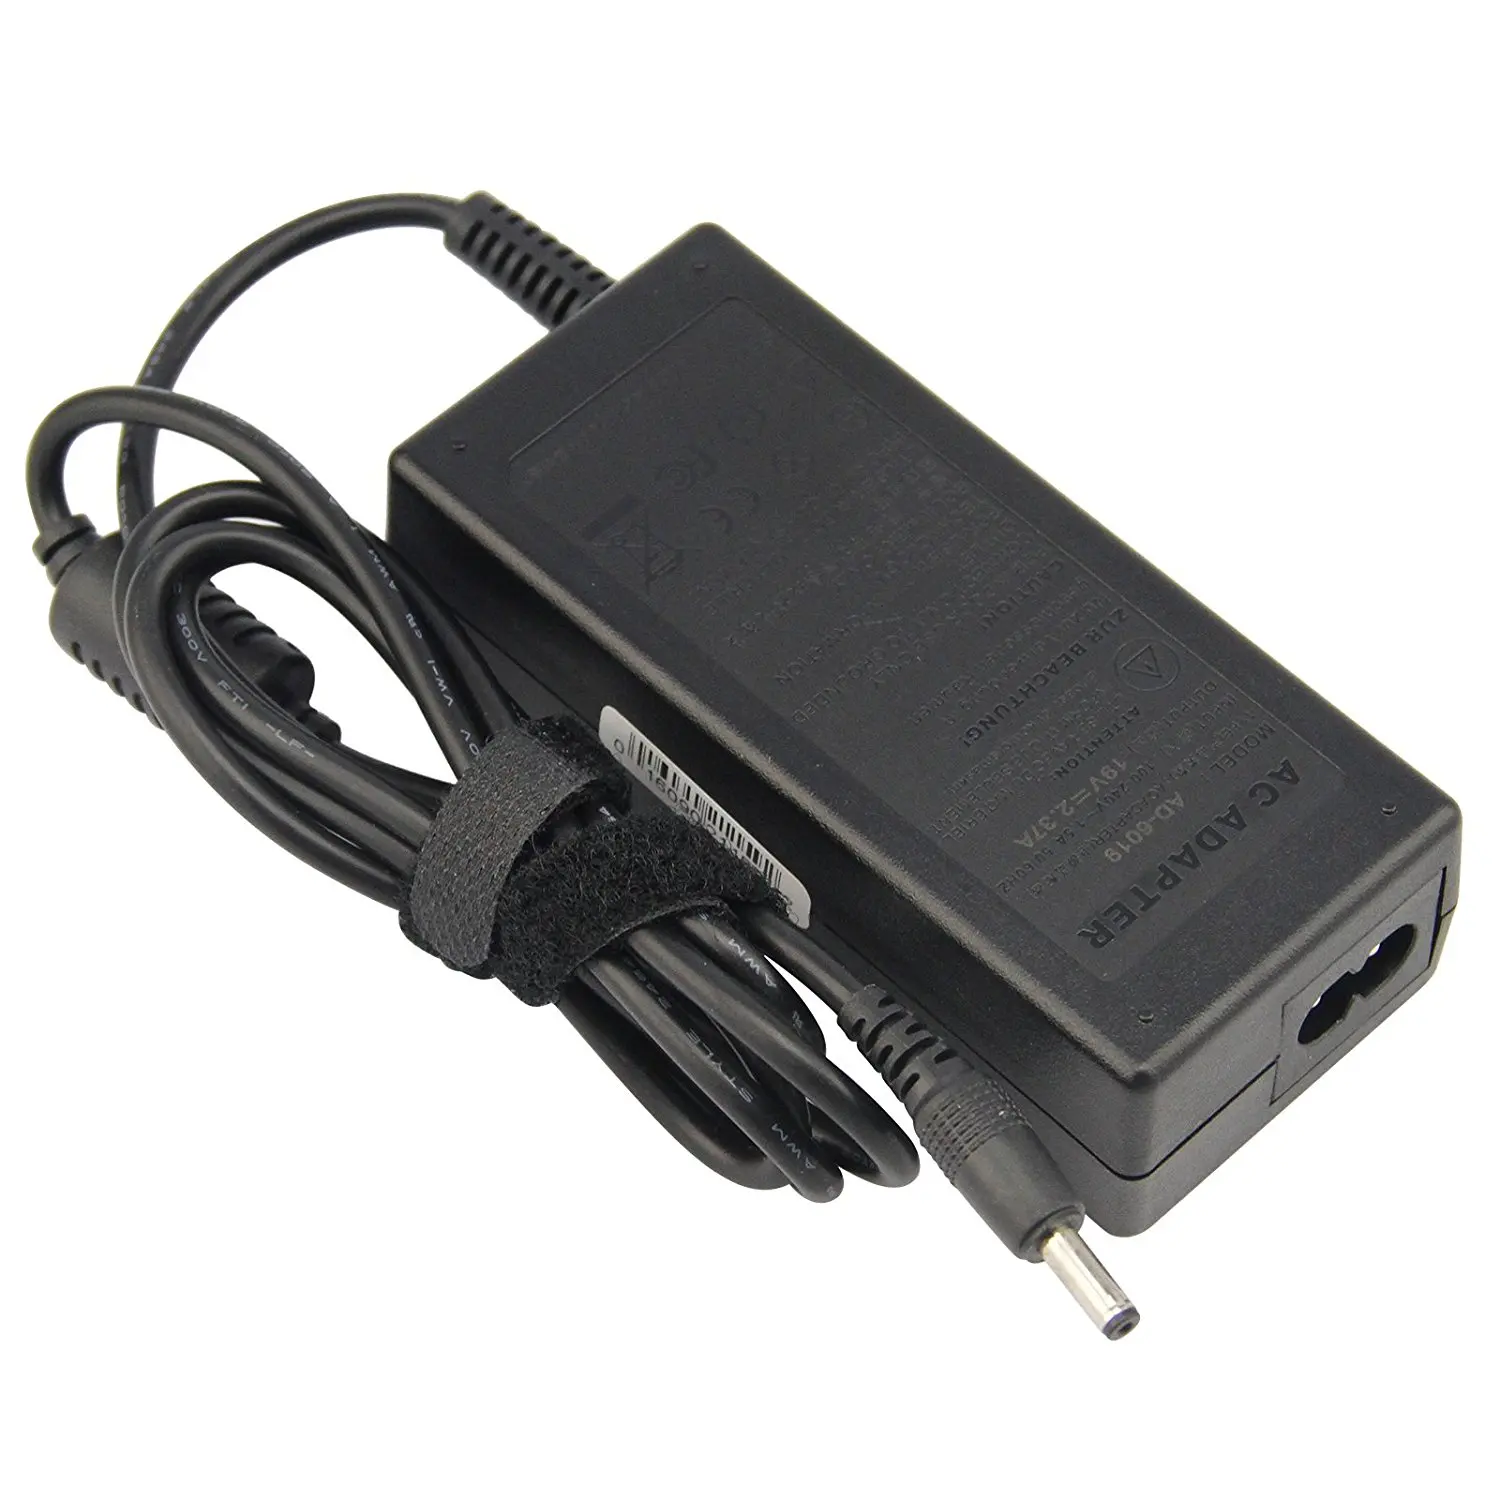 Buy Royelerstore 19v 2 37a Chromebook Charger For Asus Chromebook